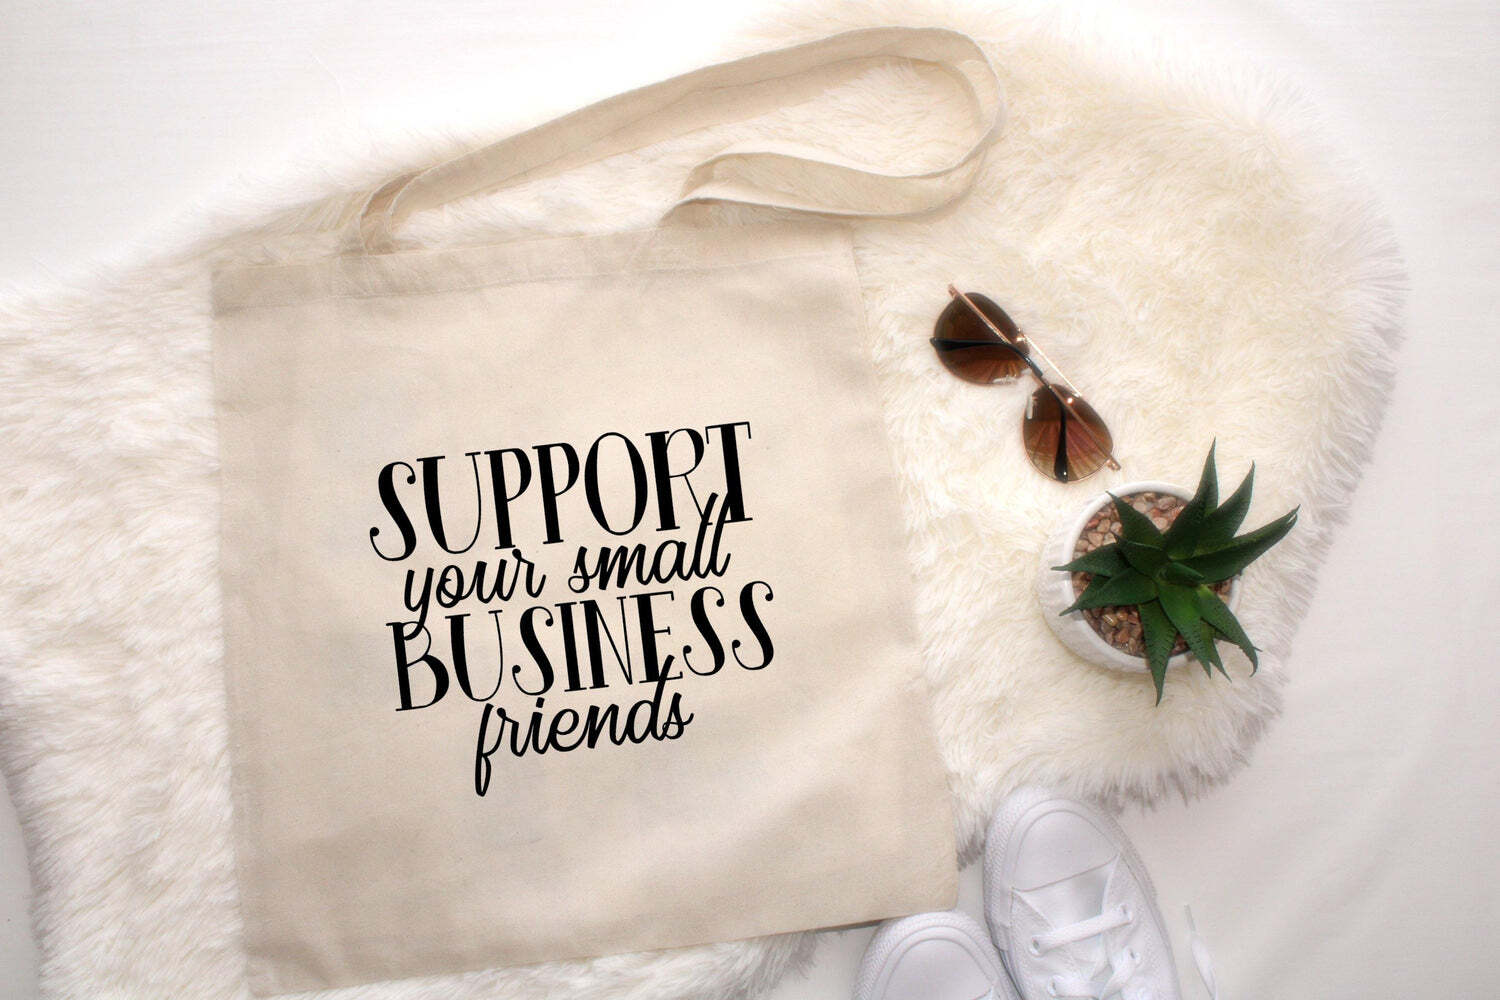 Custom Tote Bags Guide  Small Business Academy